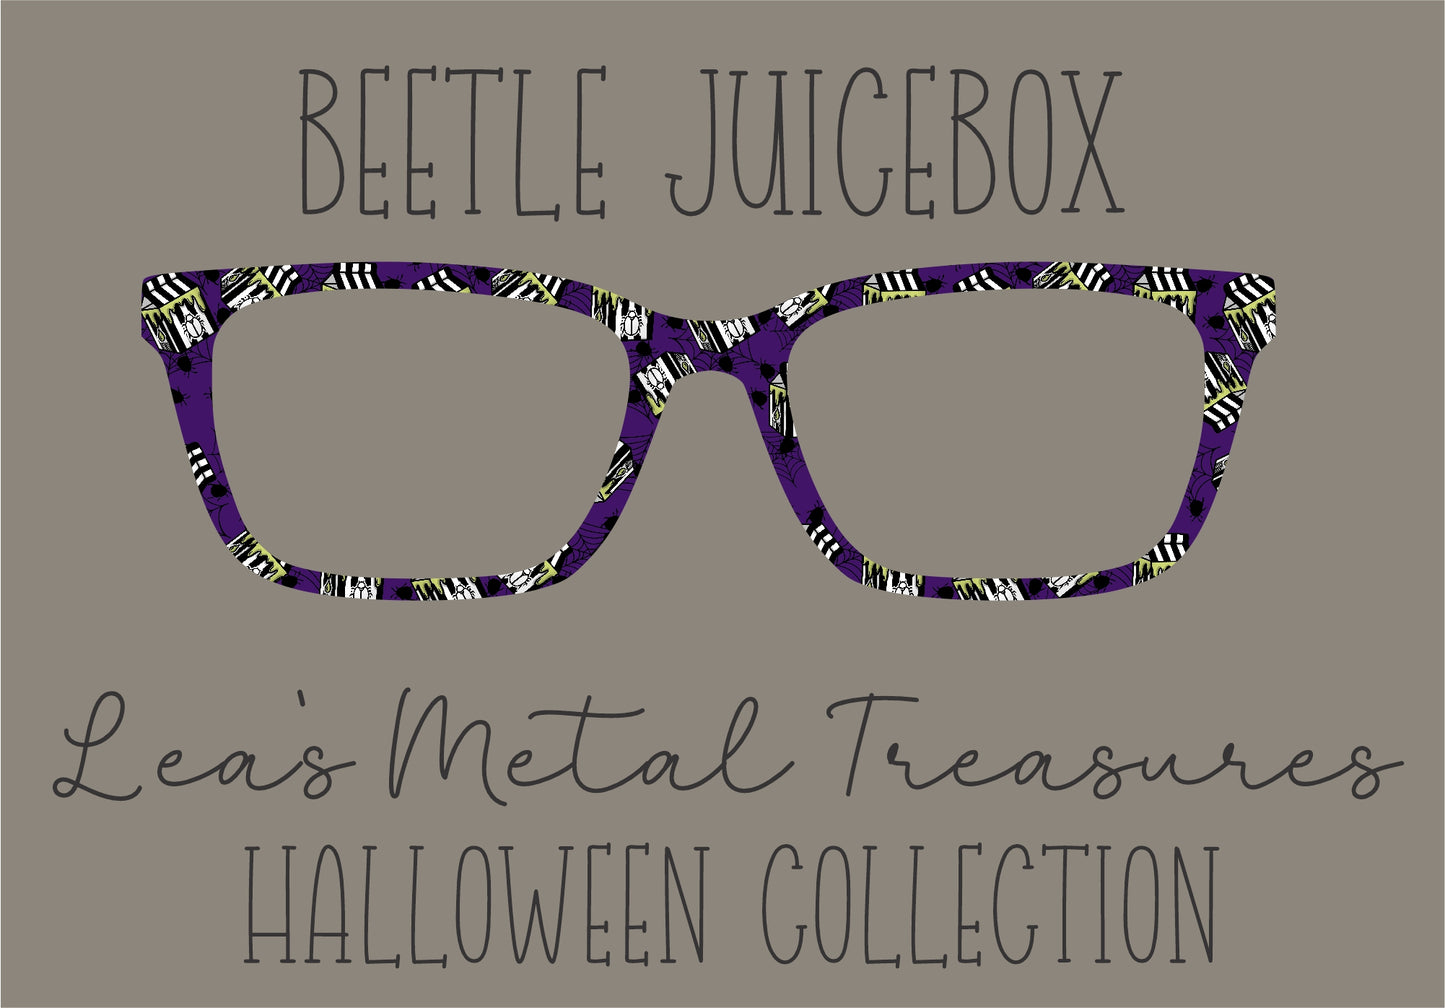 BEETLE JUICE BOX Eyewear Frame Toppers COMES WITH MAGNETS